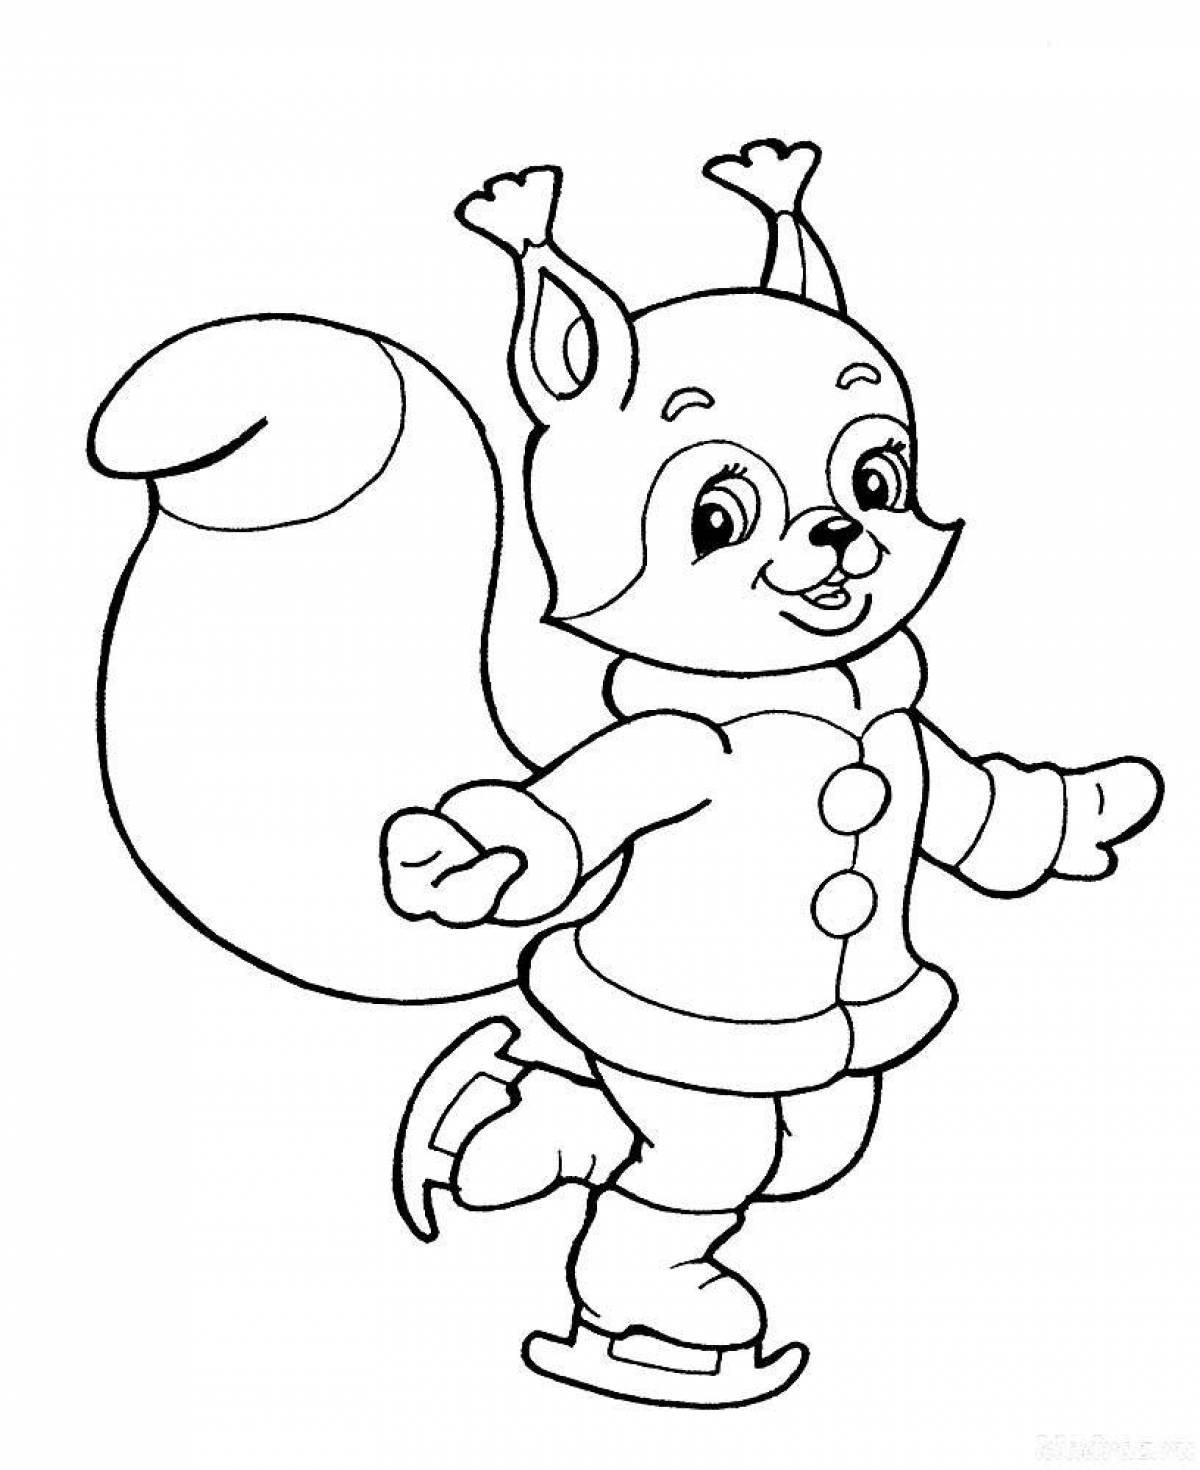 Fun coloring squirrel for kids